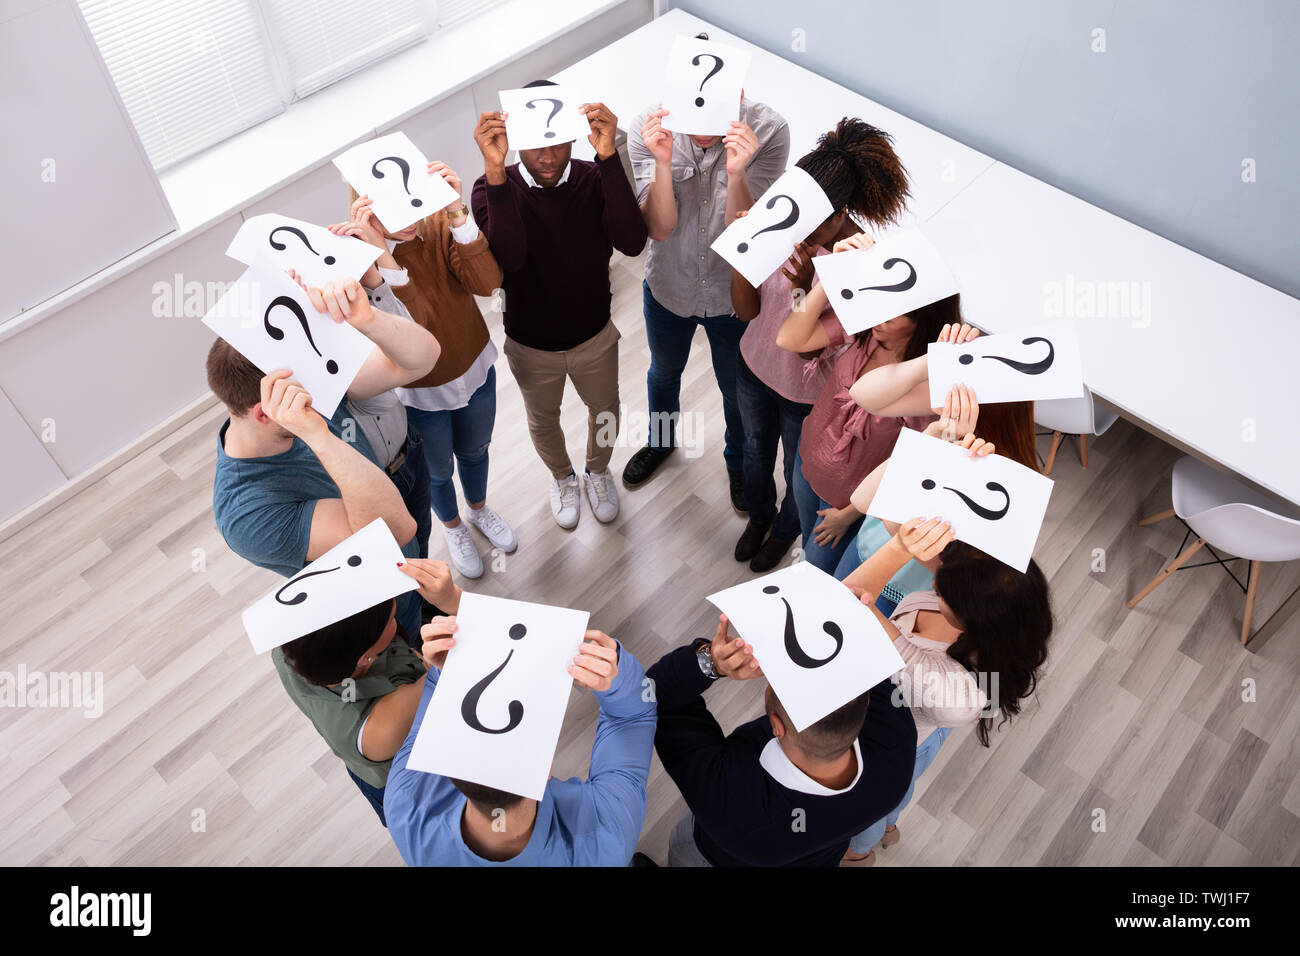 Group Of Multi-ethnic People Standing In Circle Holding Question Mark Sign Over Their Heads Stock Photo